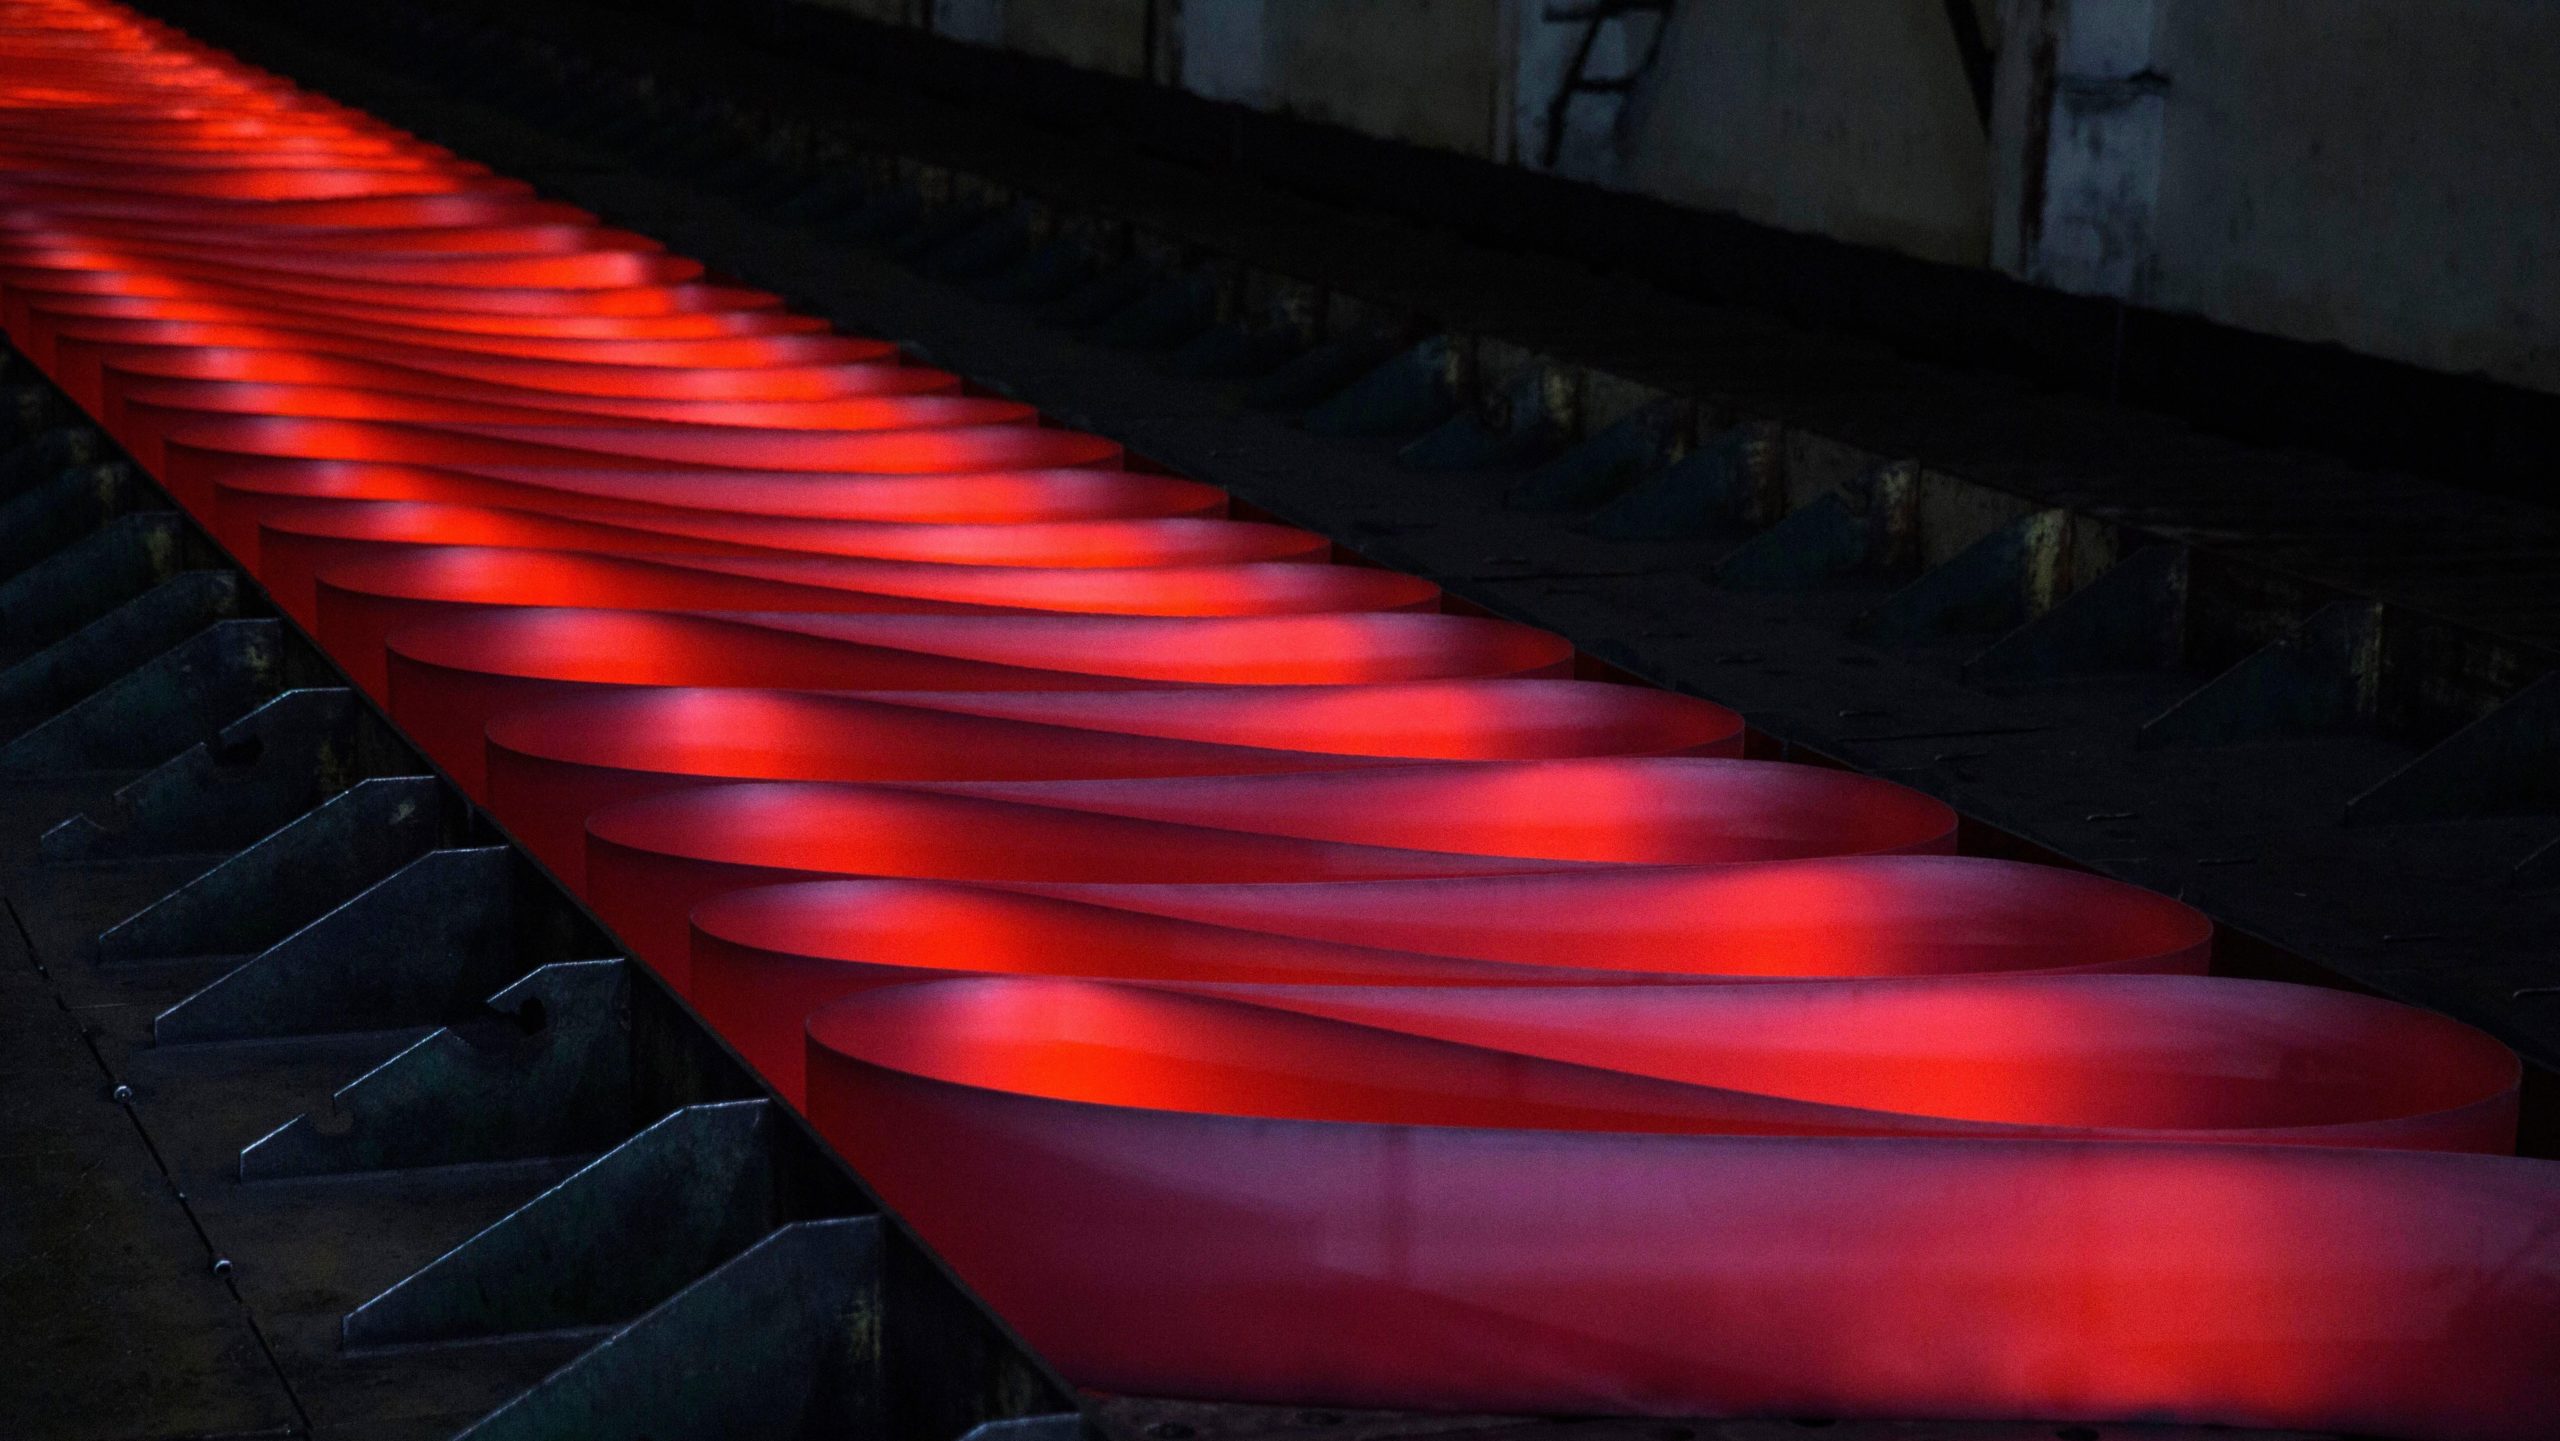 Red hot rolled steel is seen on the production line at Zhong Tian (Zenith) Steel Group Corporation. (Photo: Kevin Frayer, Getty Images)